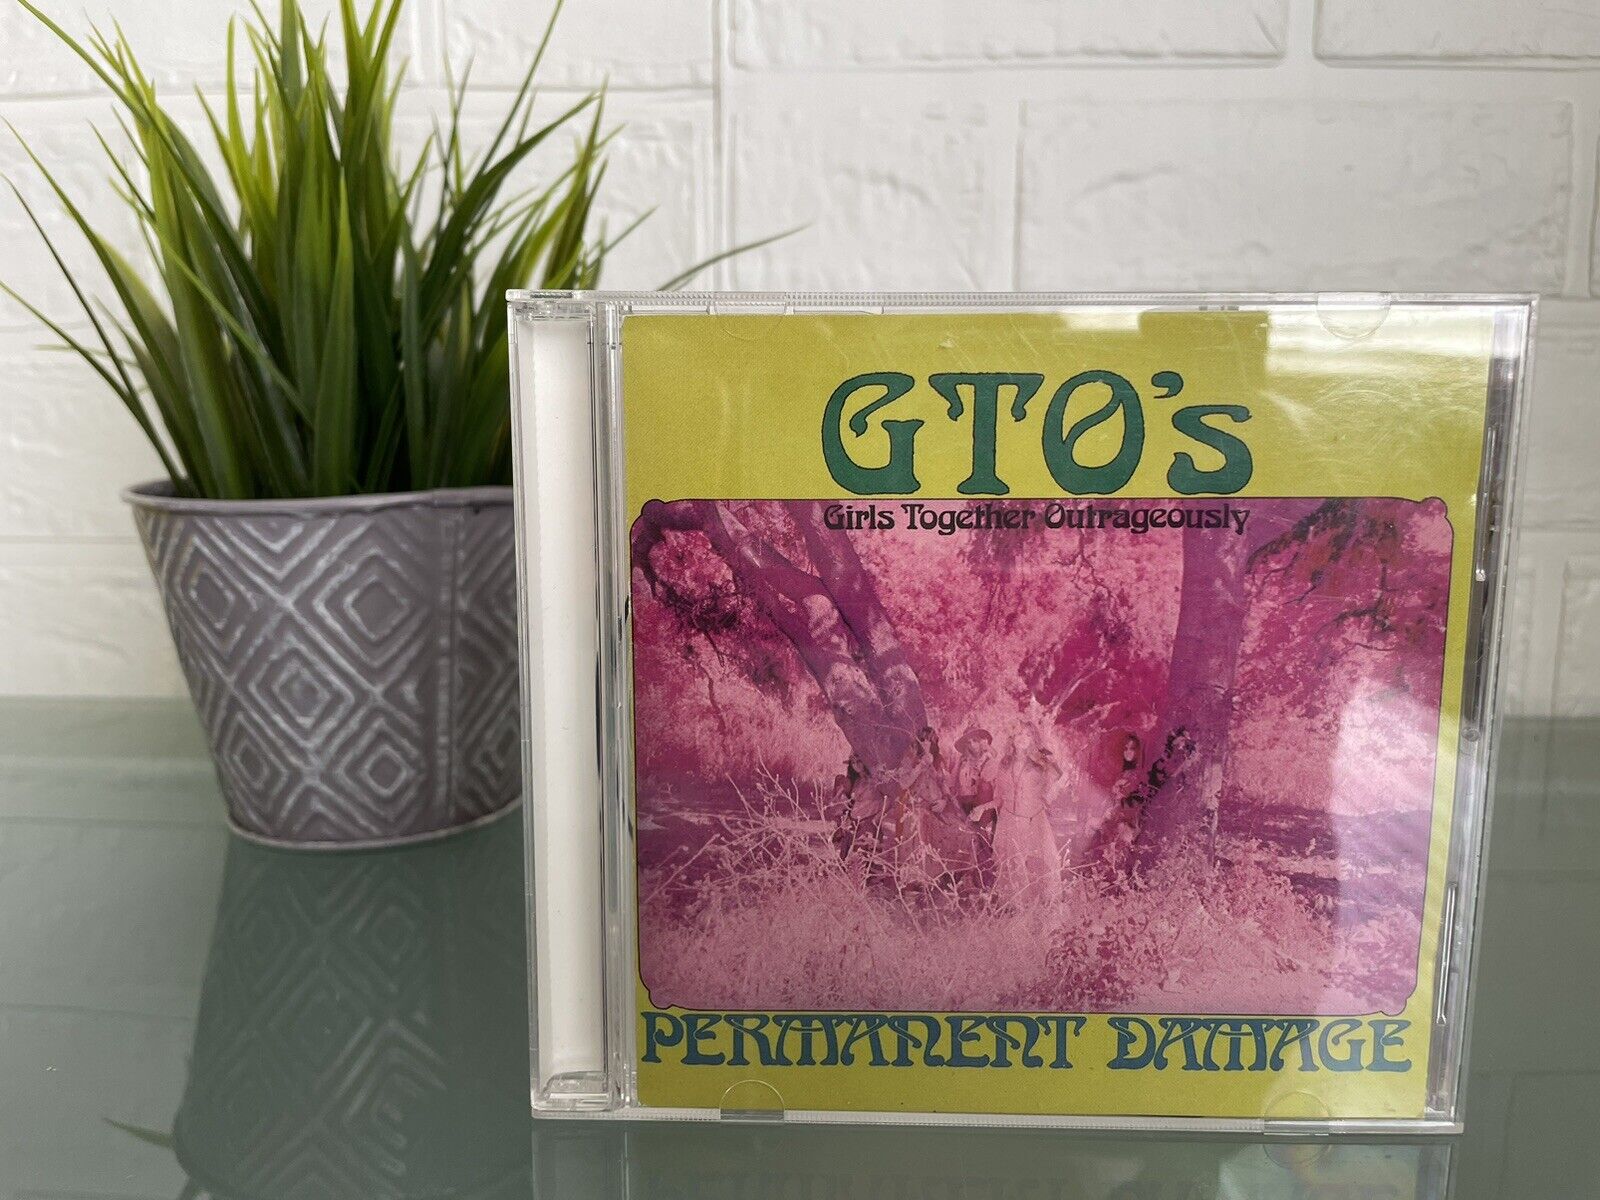 GTO\'S PERMANENT DAMAGE (GIRLS TOGETHER OUTRAGEOUSLY) CD 1989 VERY RARE